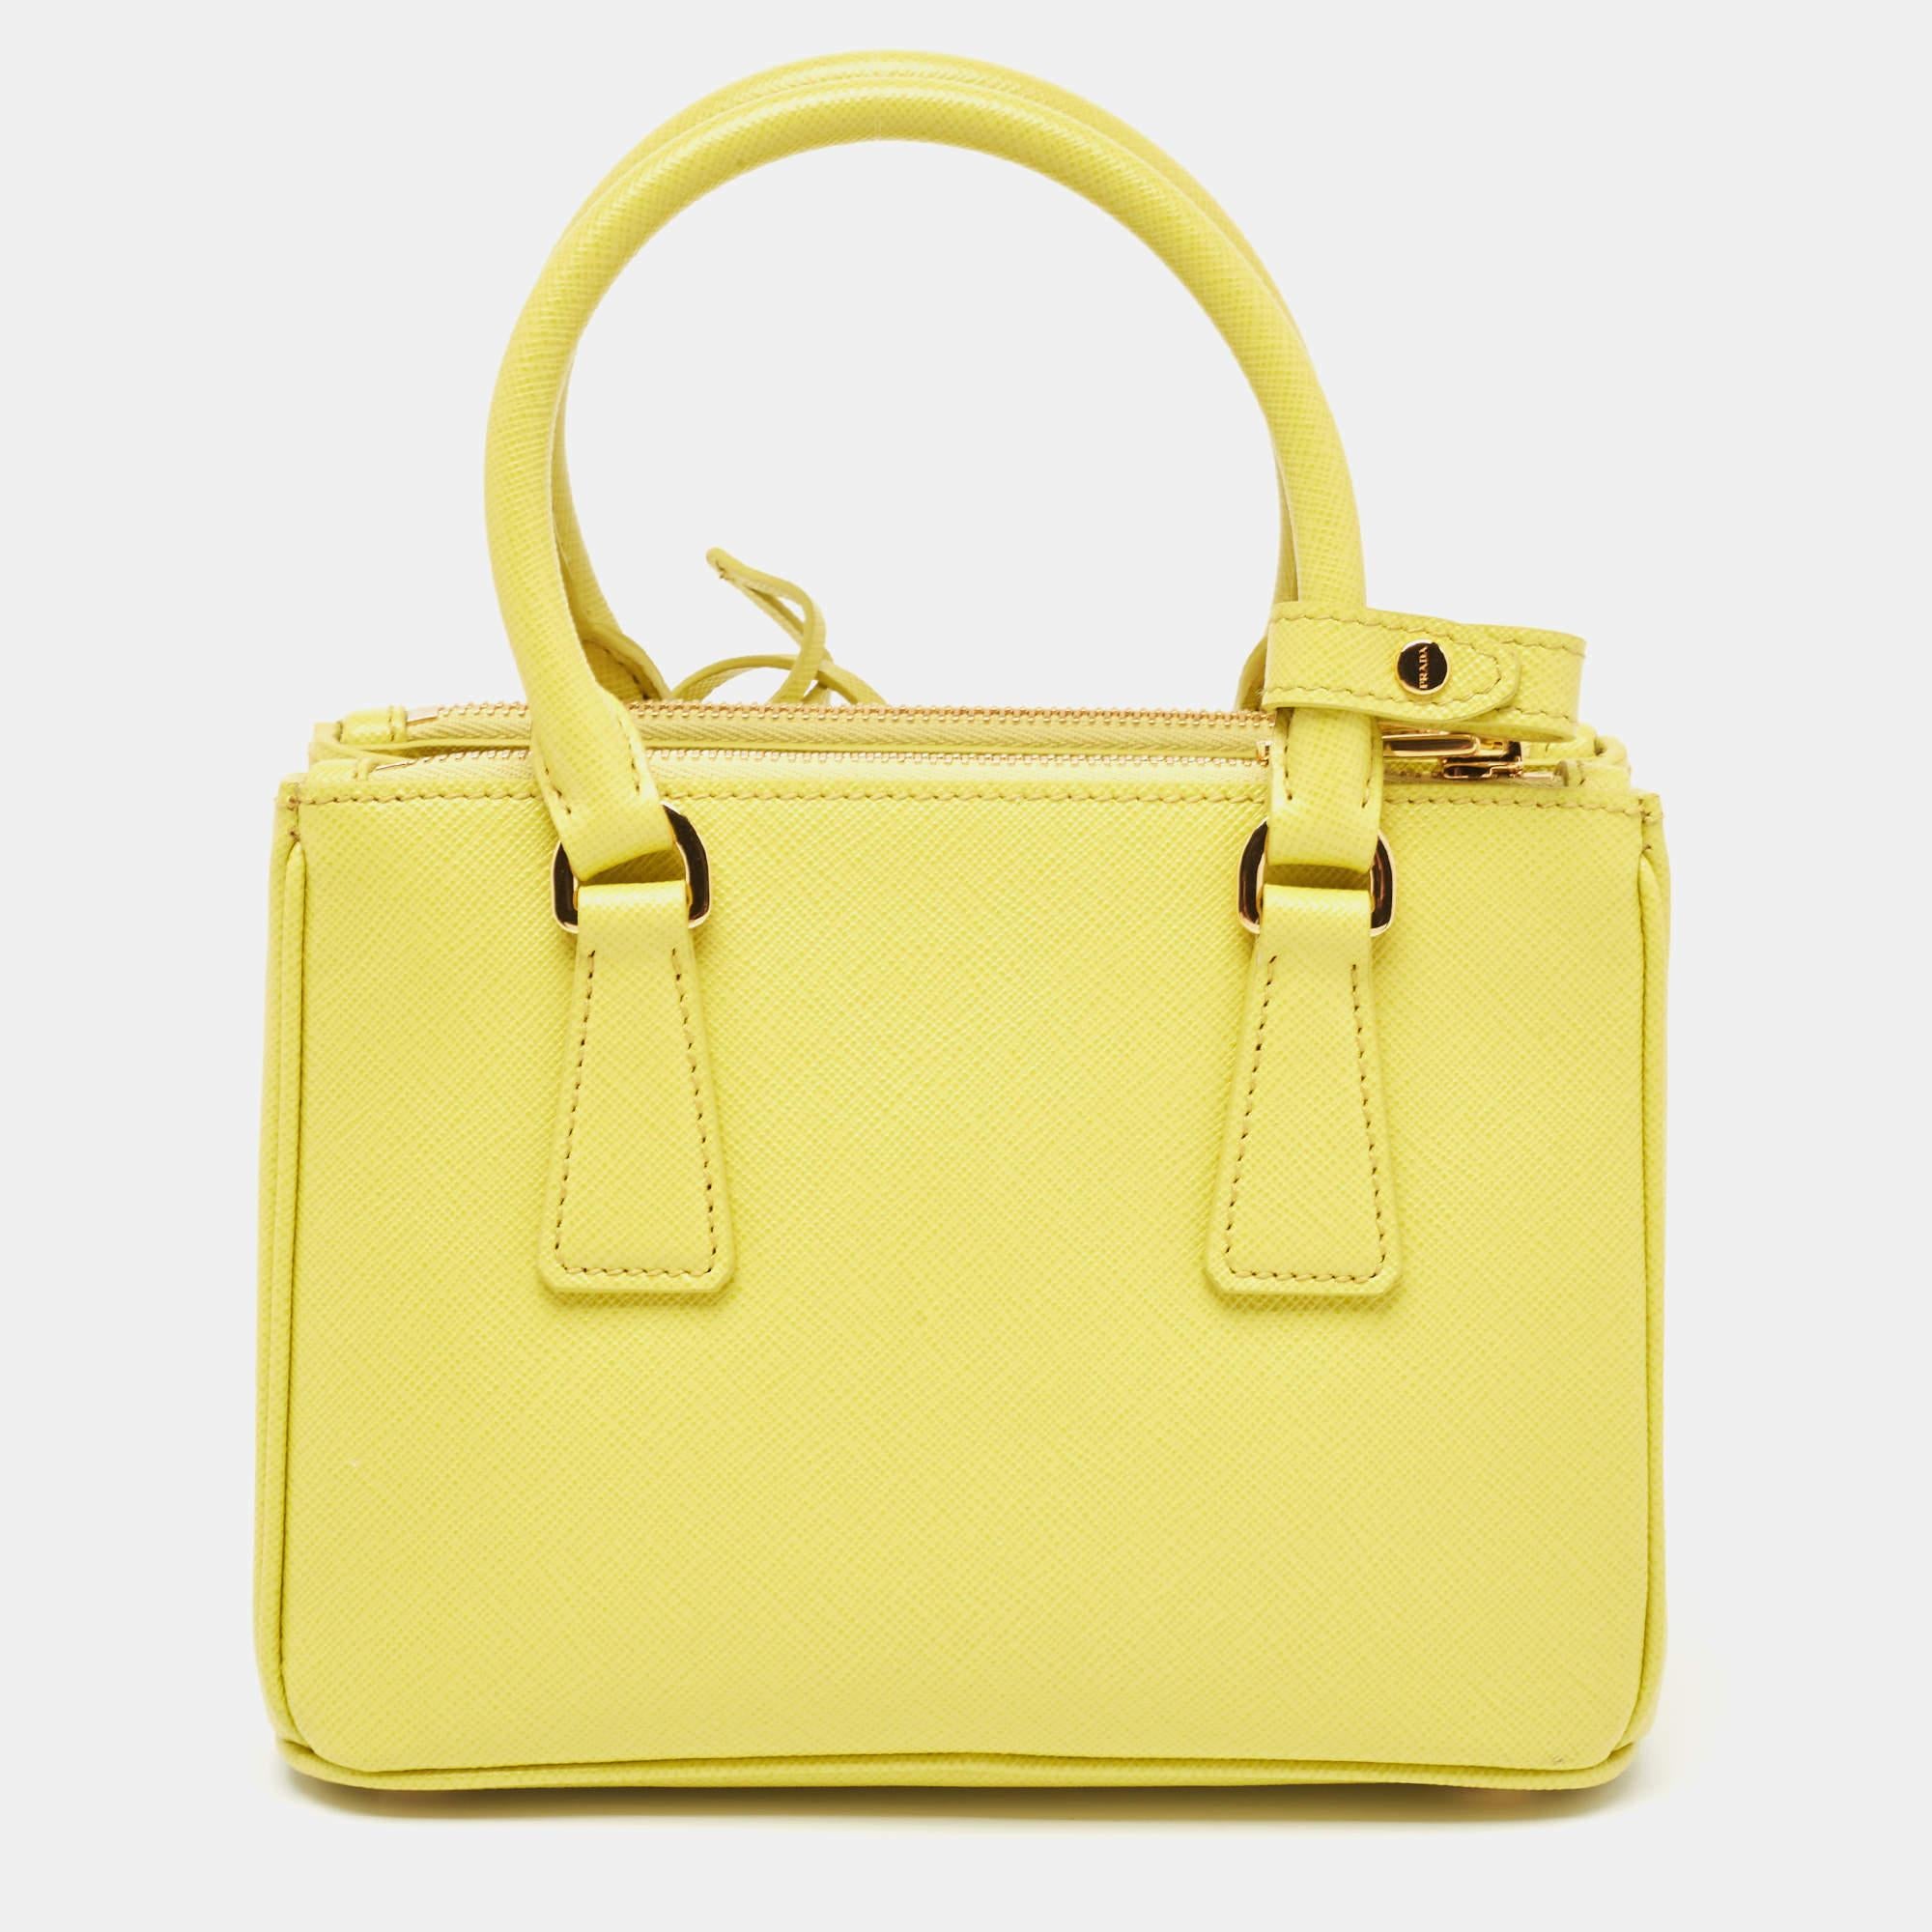 Loved for its classic appeal and functional design, Galleria is one of the most iconic and popular bags from the house of Prada. This beauty in yellow is crafted from Saffiano leather and is equipped with two top handles, the brand logo at the